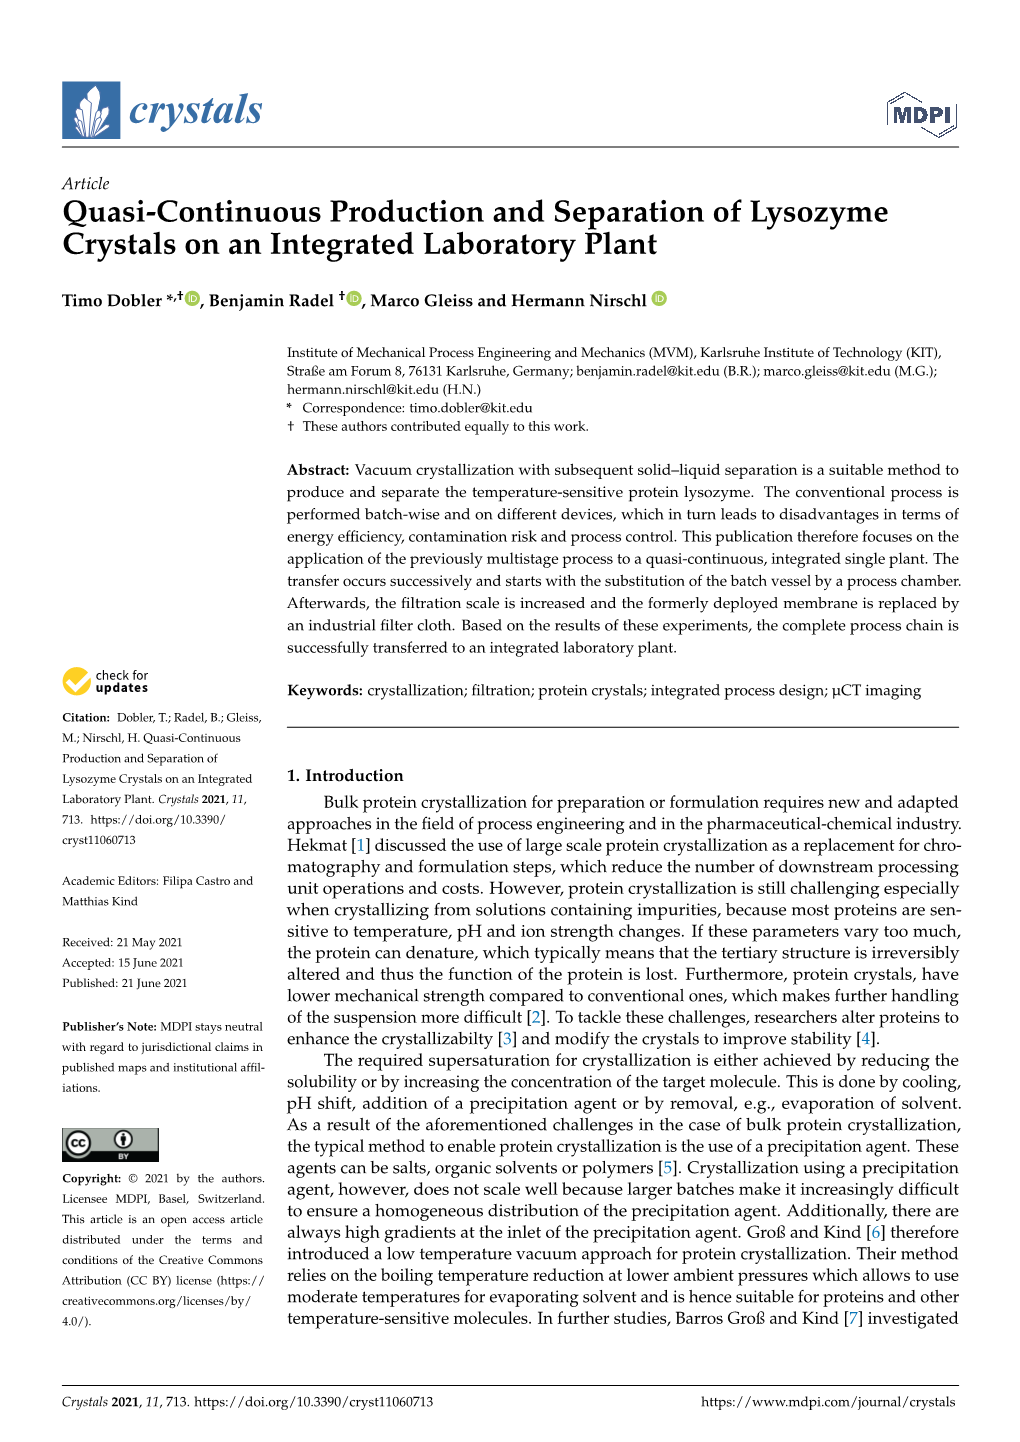 Quasi-Continuous Production and Separation of Lysozyme Crystals on an Integrated Laboratory Plant